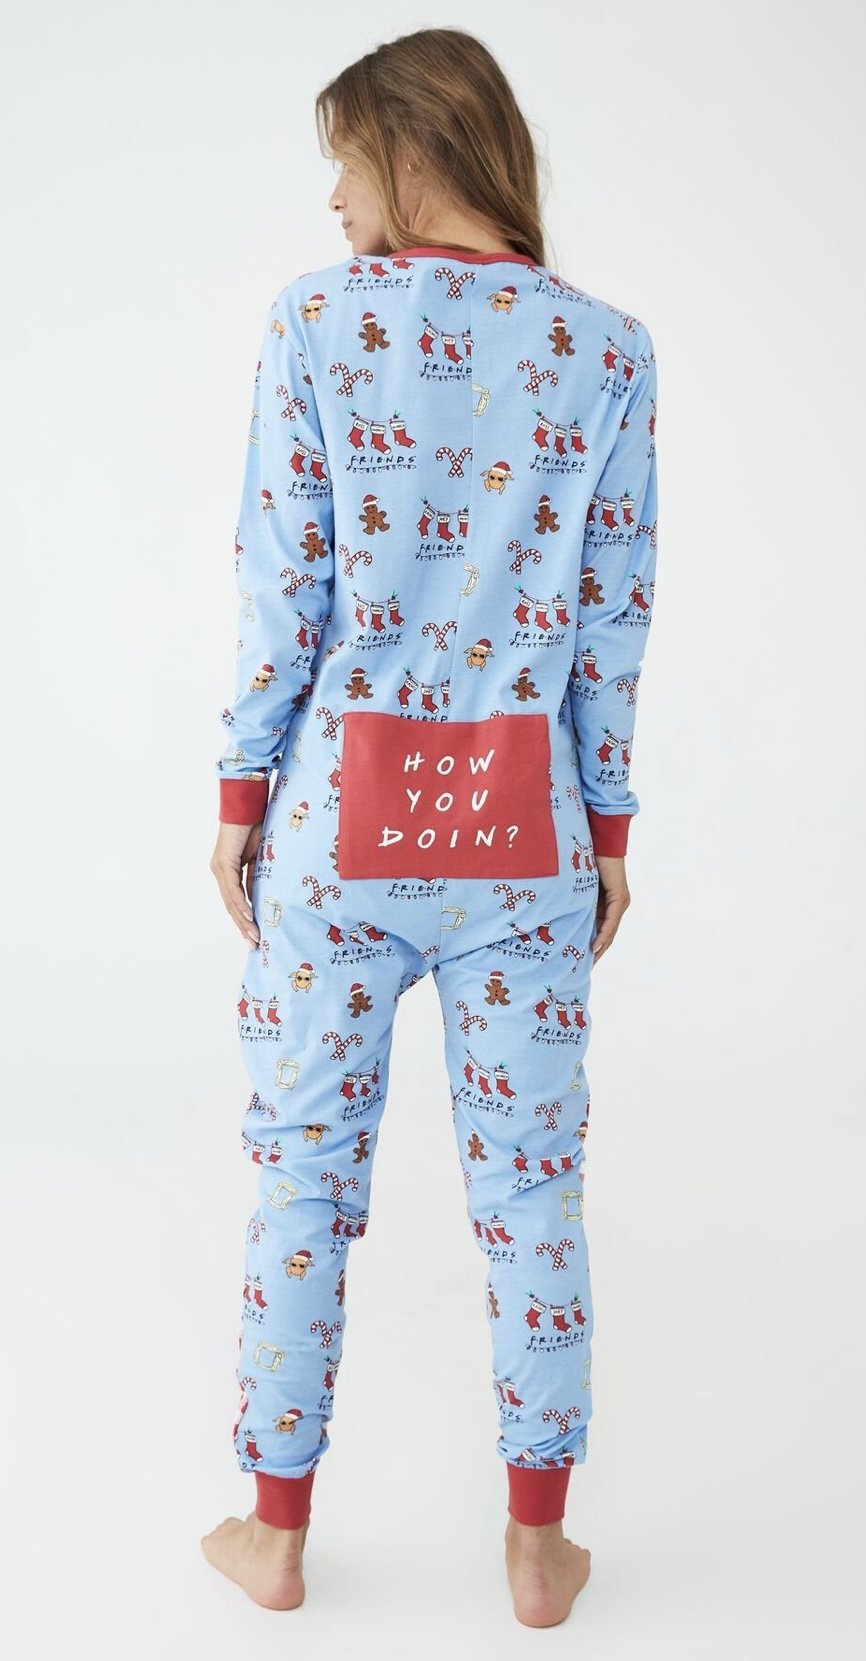 Matching Family Holiday Pajamas — The Overwhelmed Mommy Blog